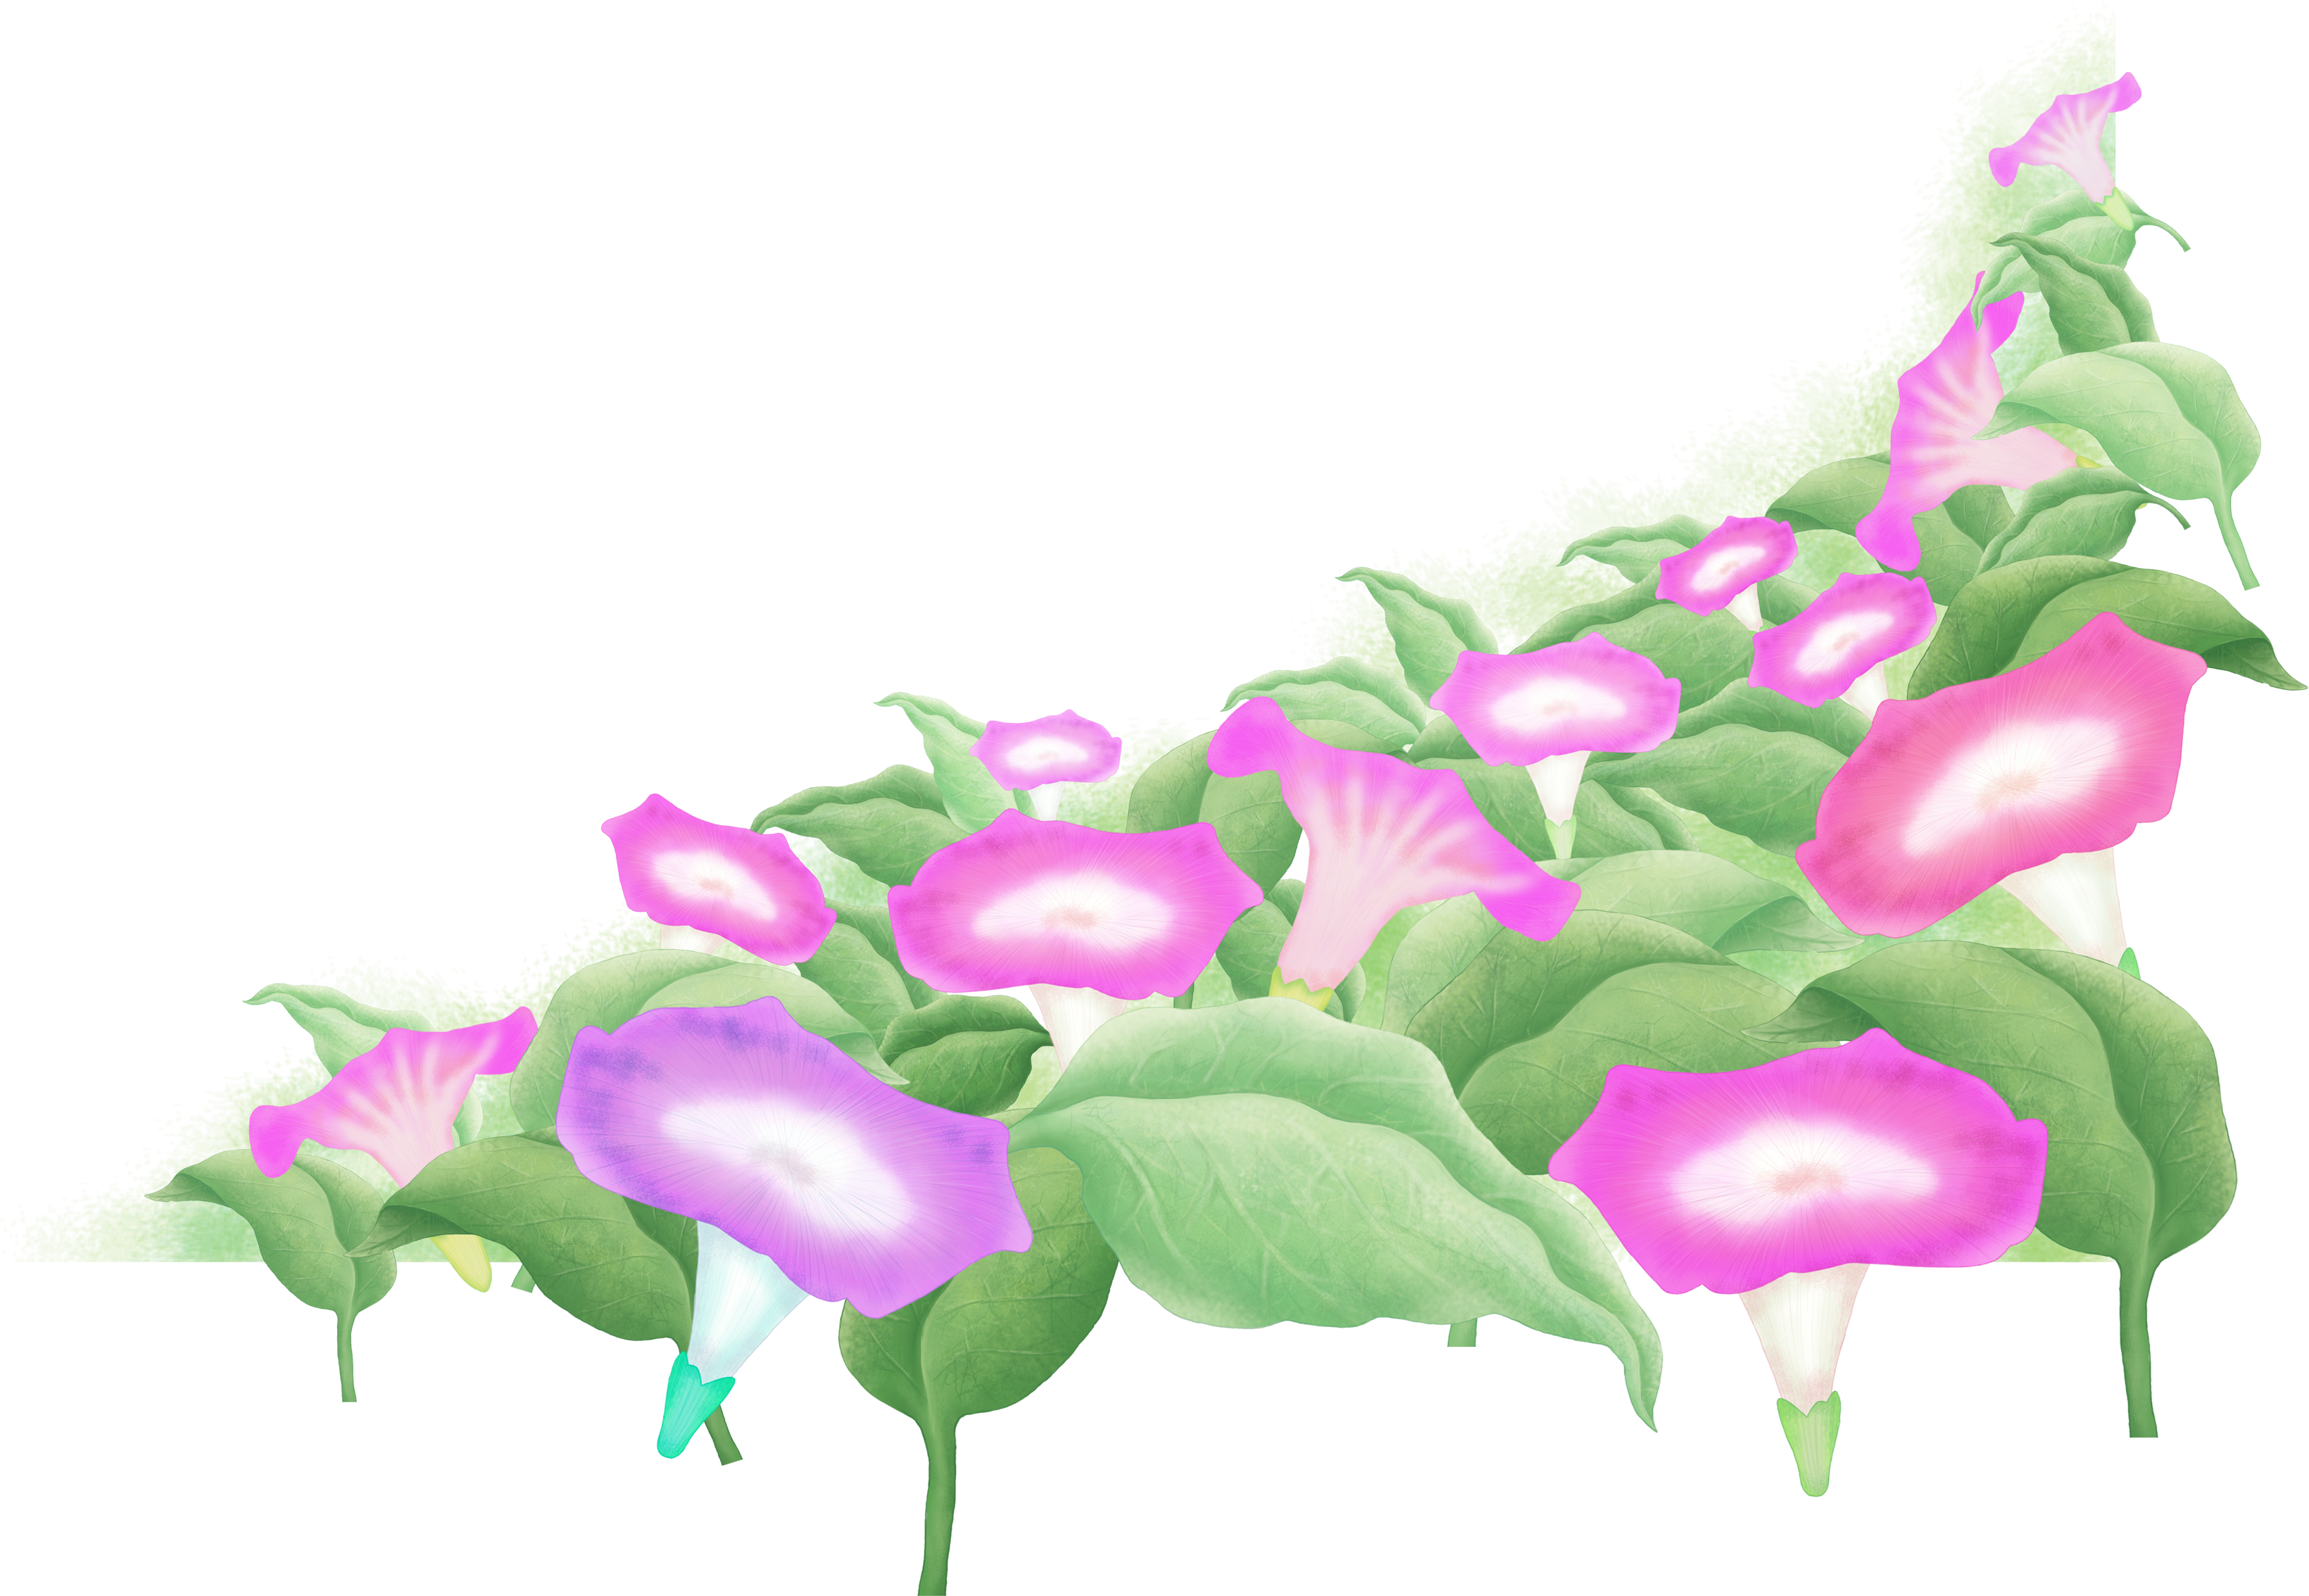 Morning Glory Flowers Transparent Background PNG